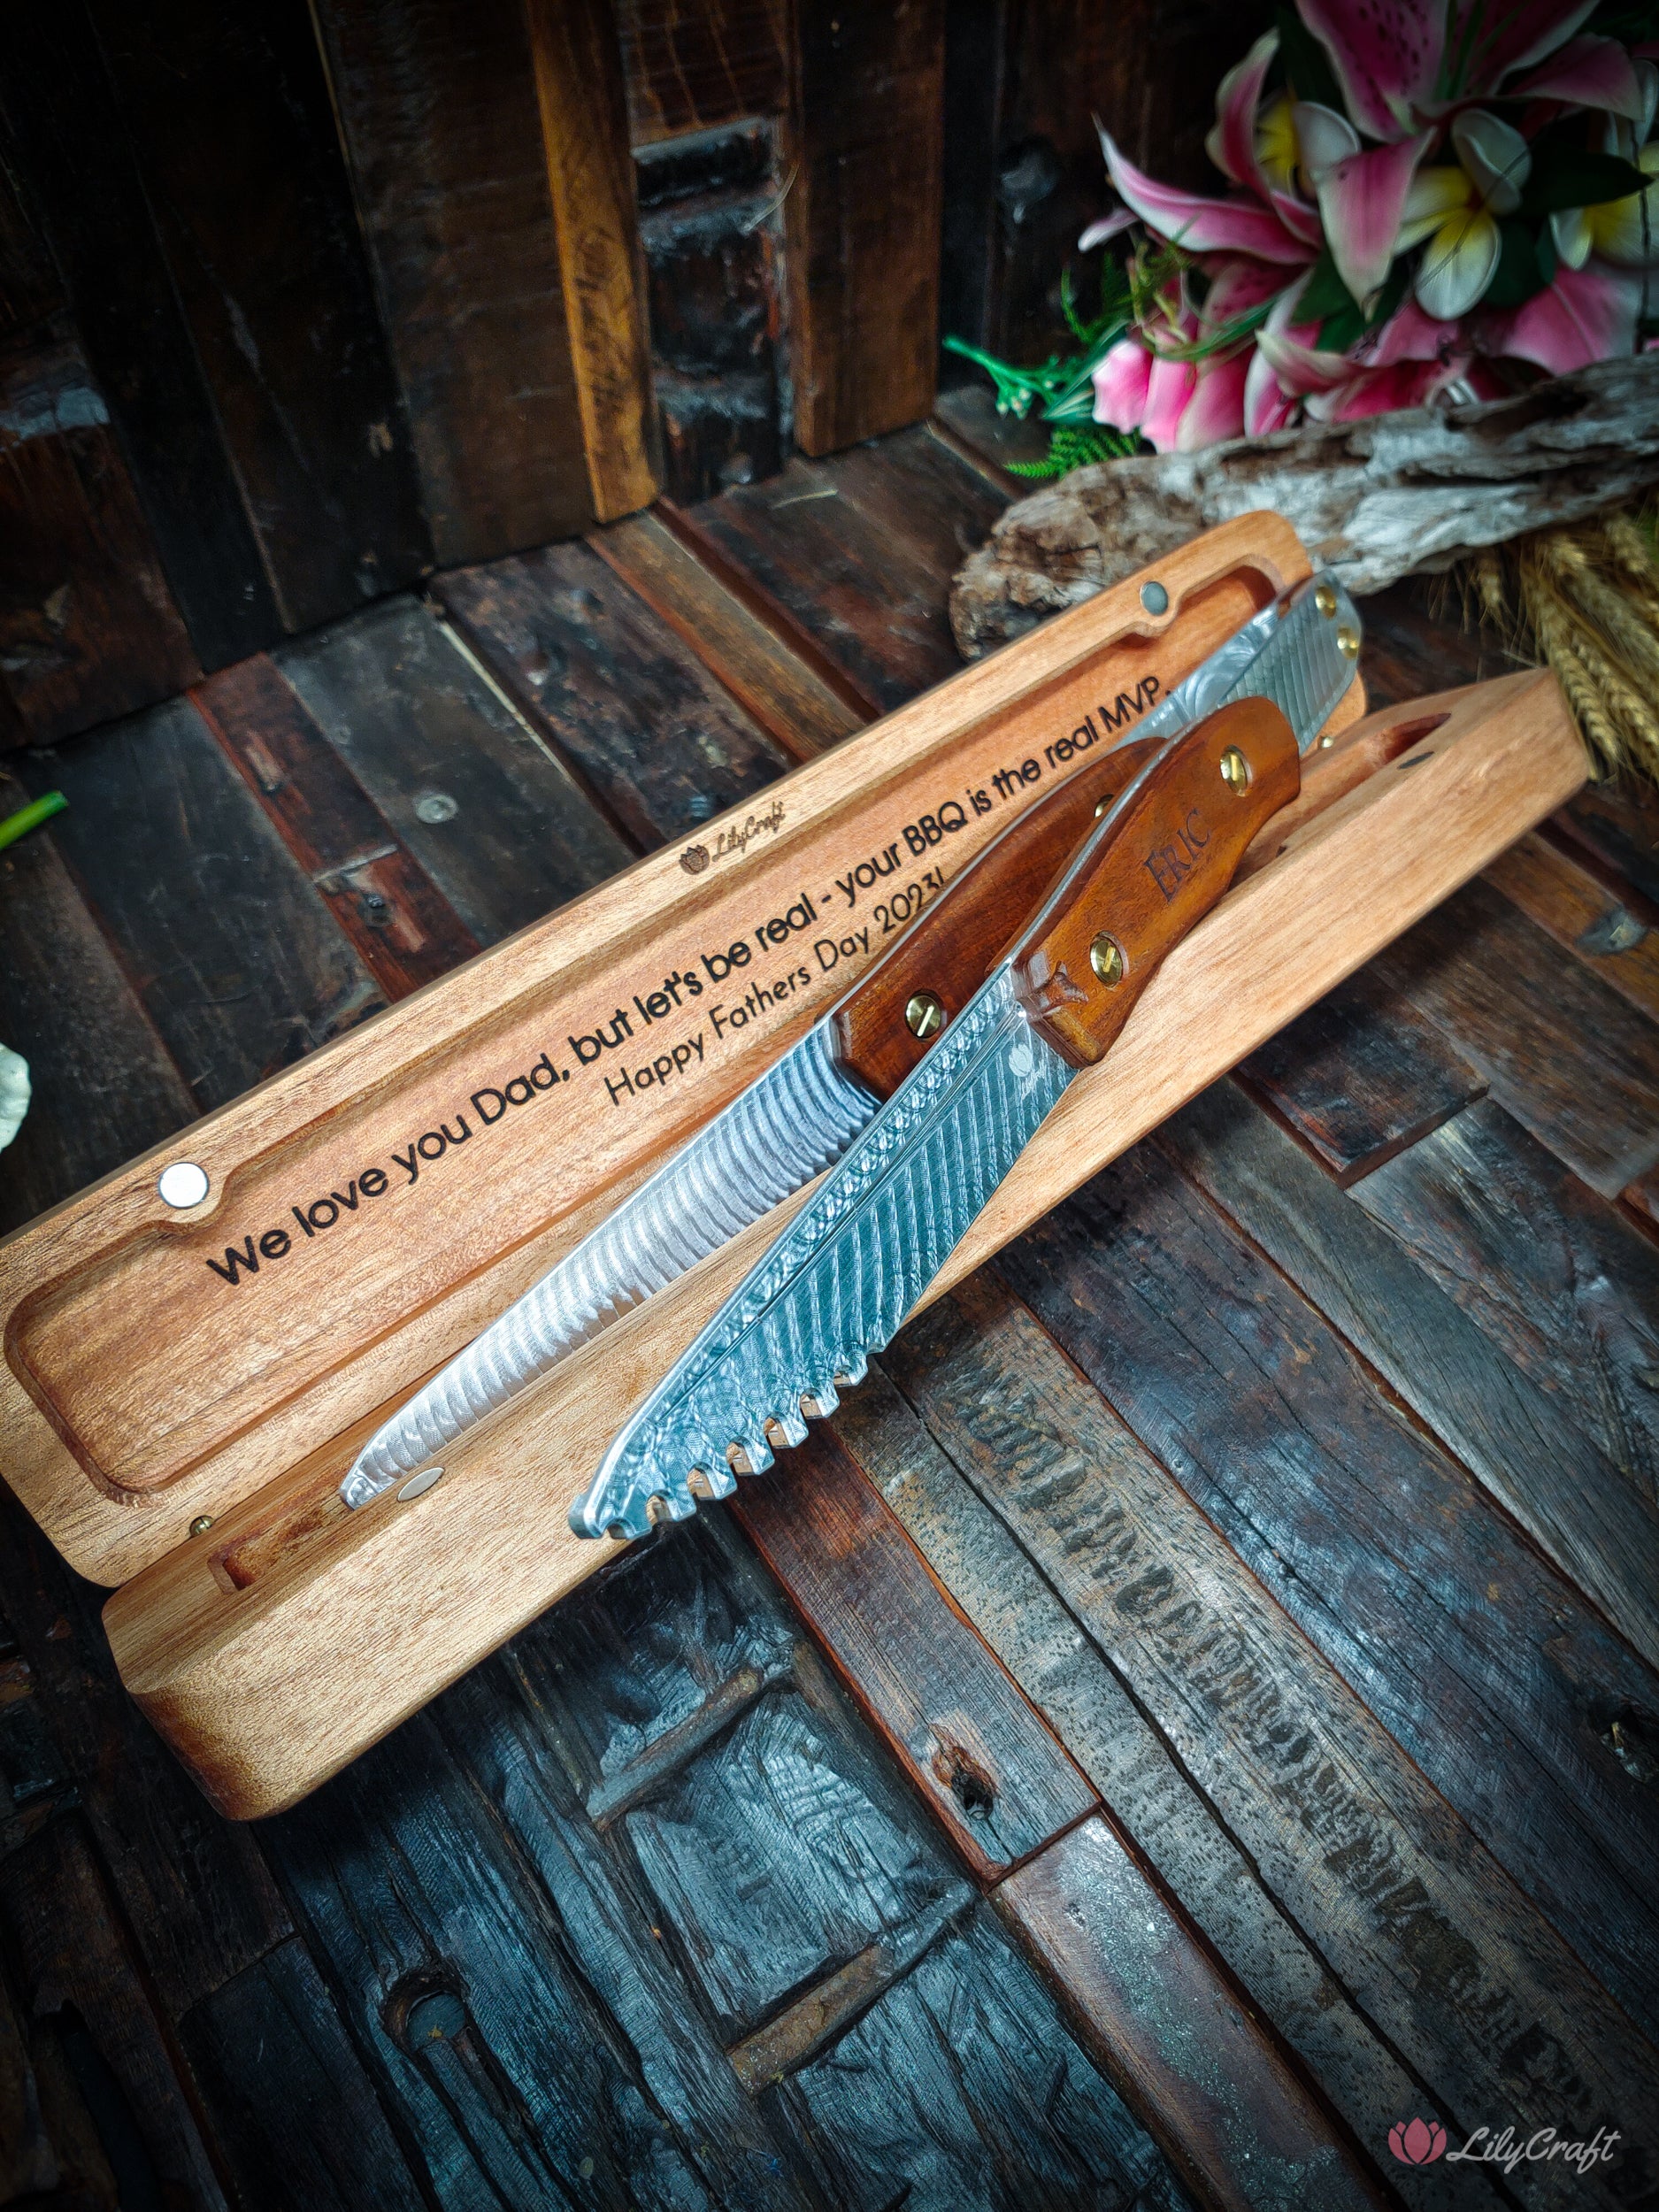 Customised BBQ tool set for Dad - custom engraved tongs with gift case included.